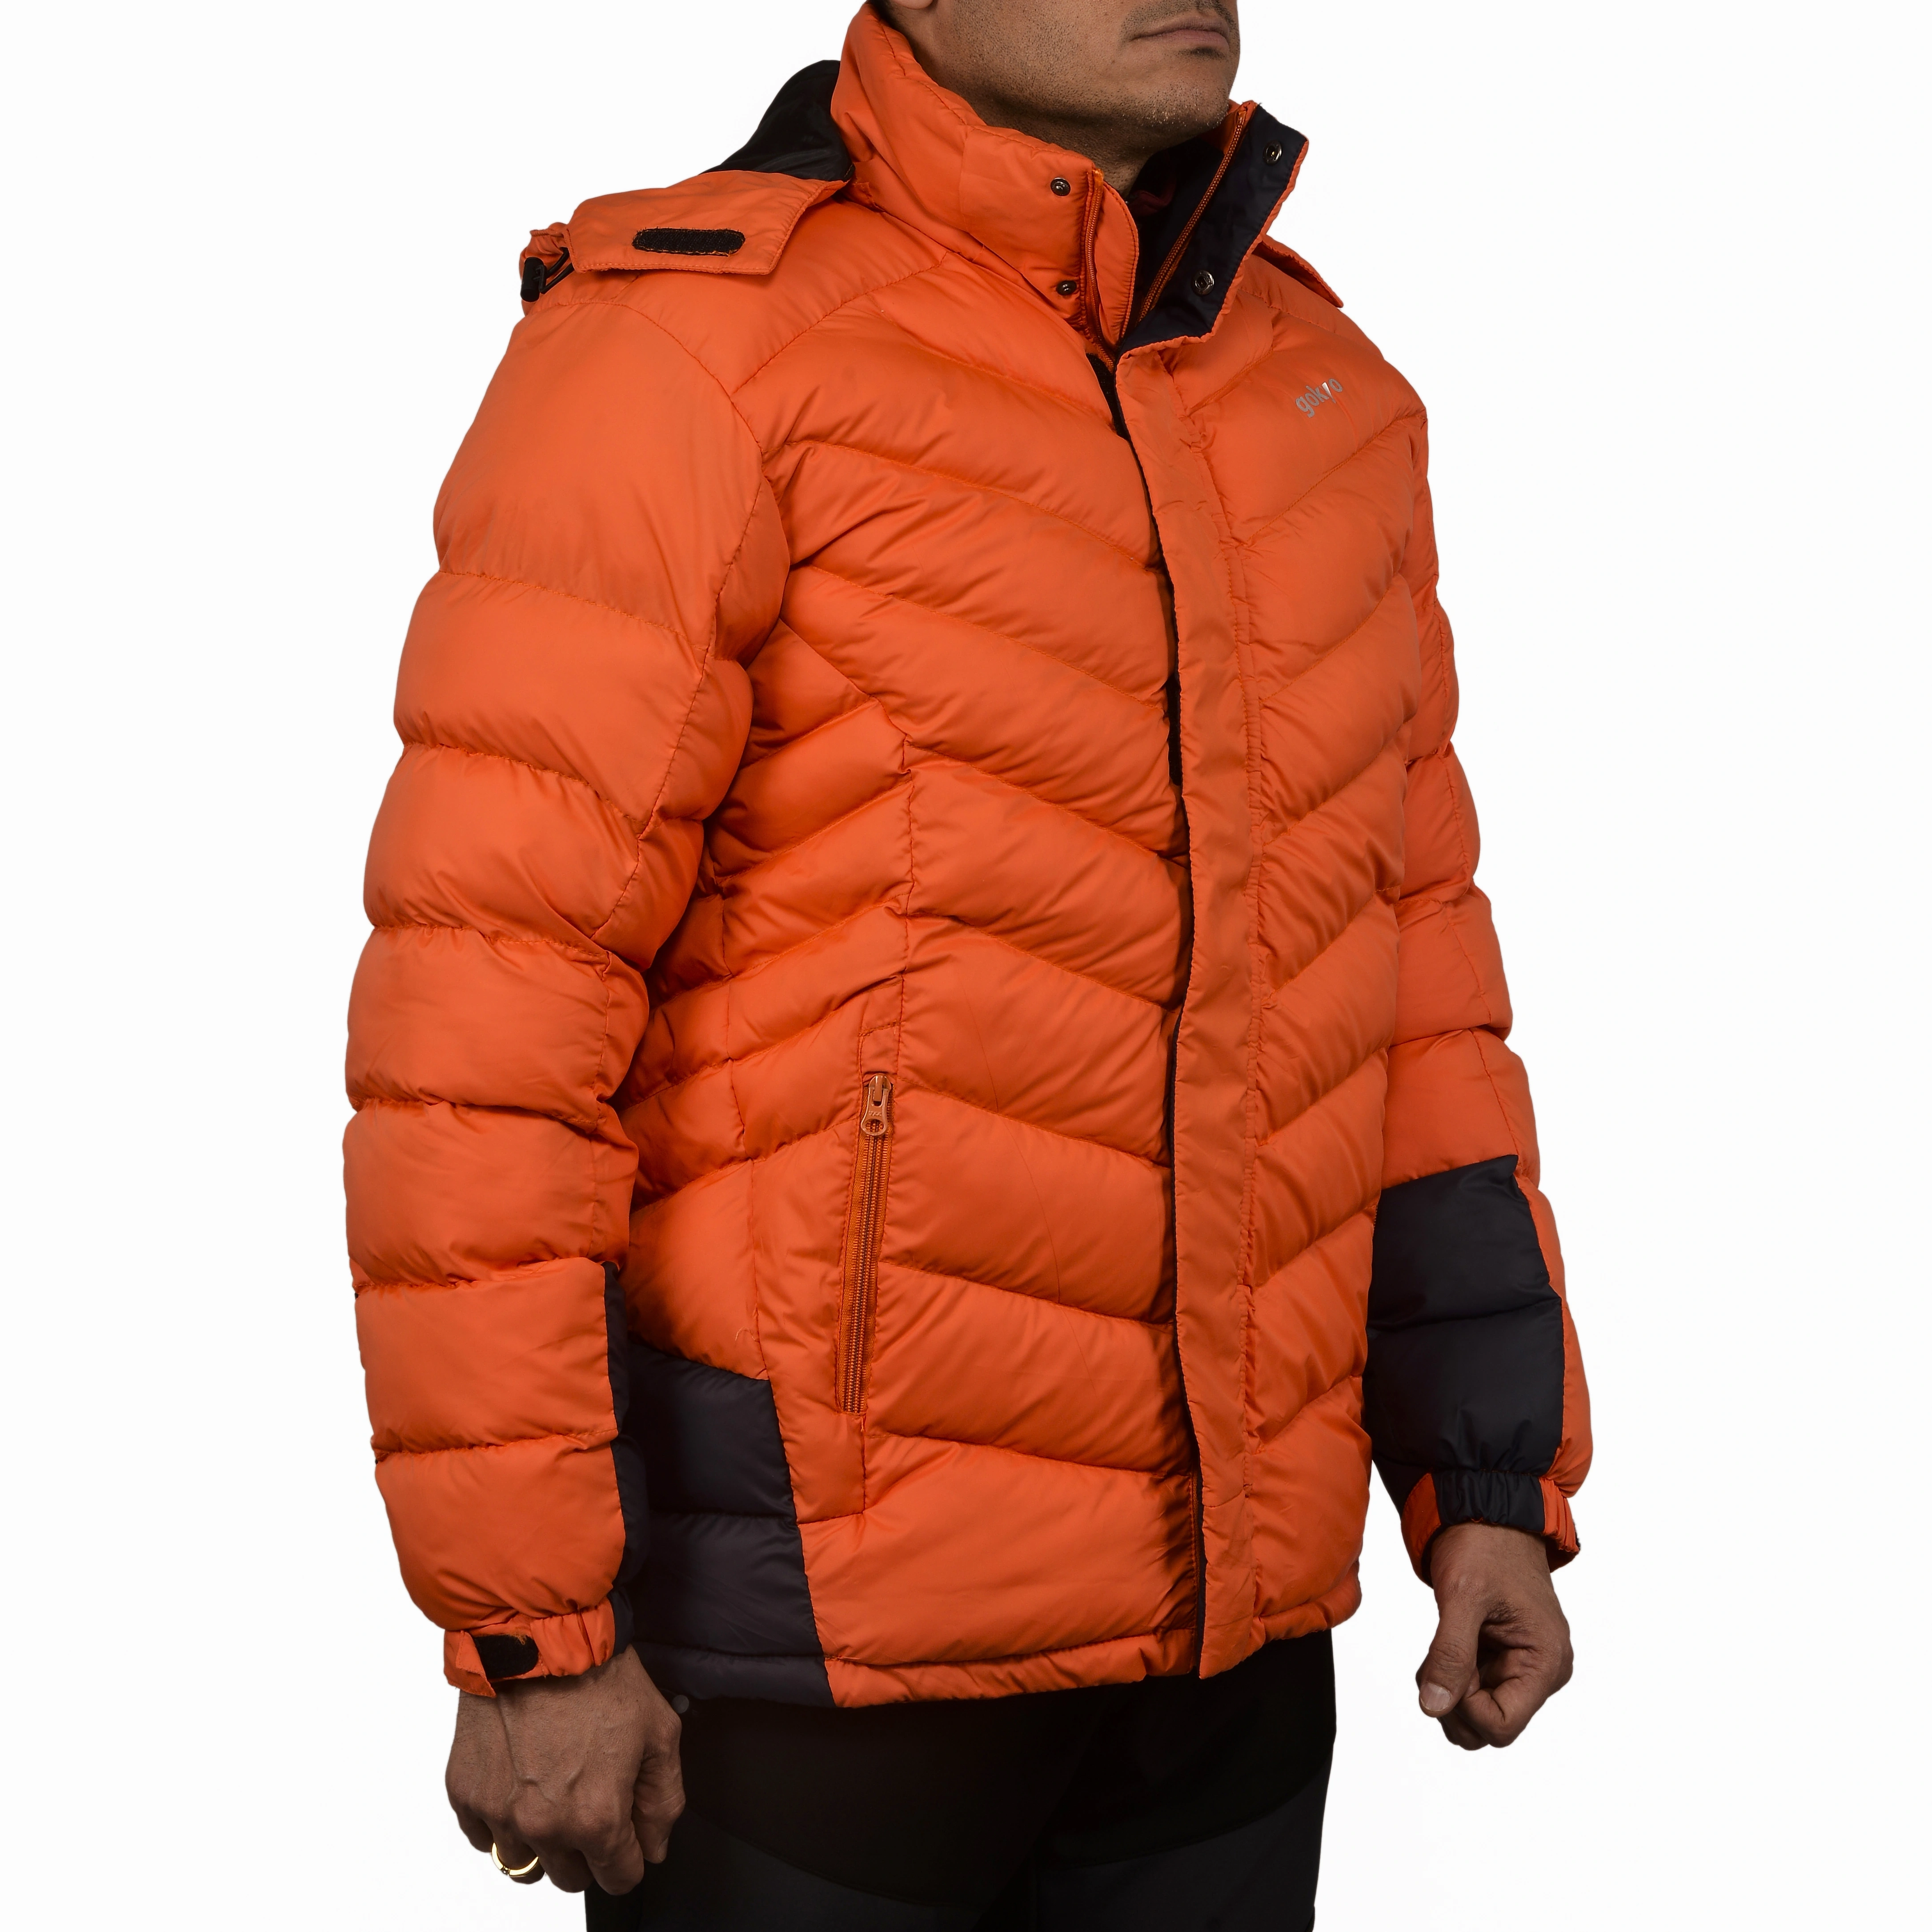 K2 Survivor Down Jacket for Men: Stylized Functionality for Extreme Cold Weather Expeditions (Up to -20°C)-3XL-Orange-1